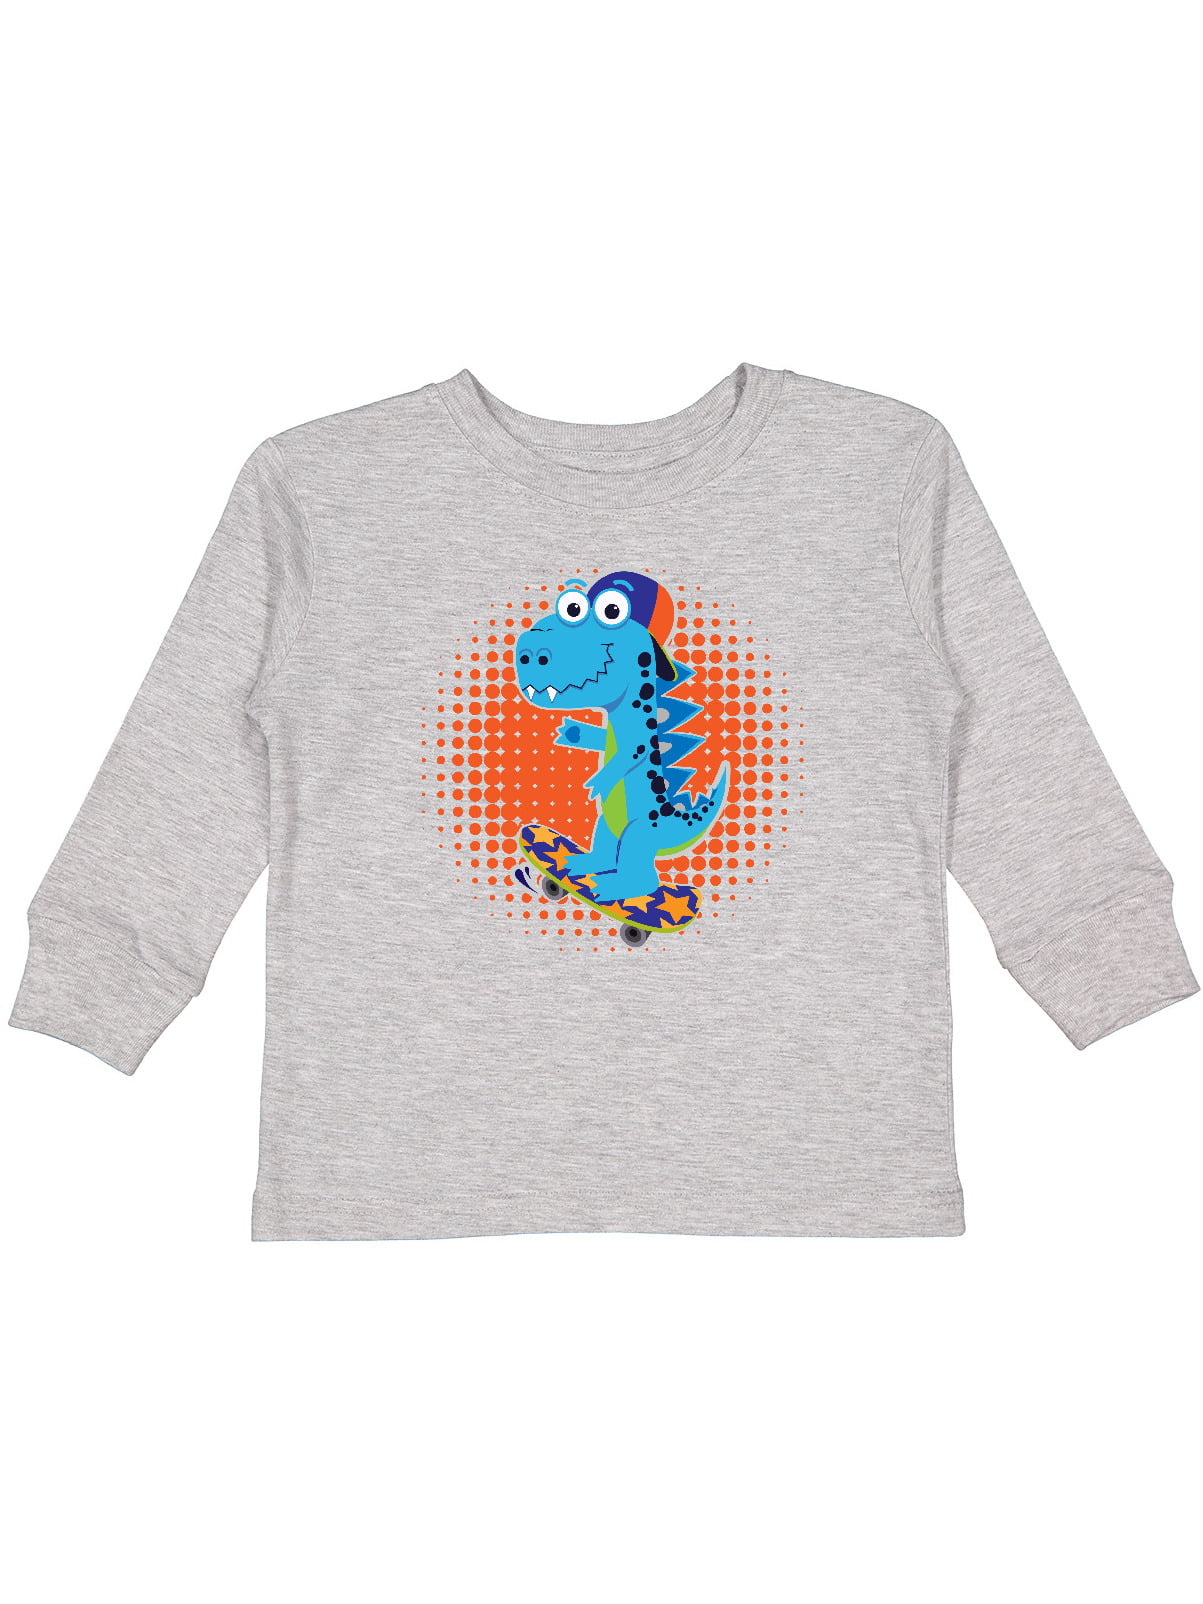 inktastic Just a Girl Who Loves Koi Fish Toddler Long Sleeve T-Shirt